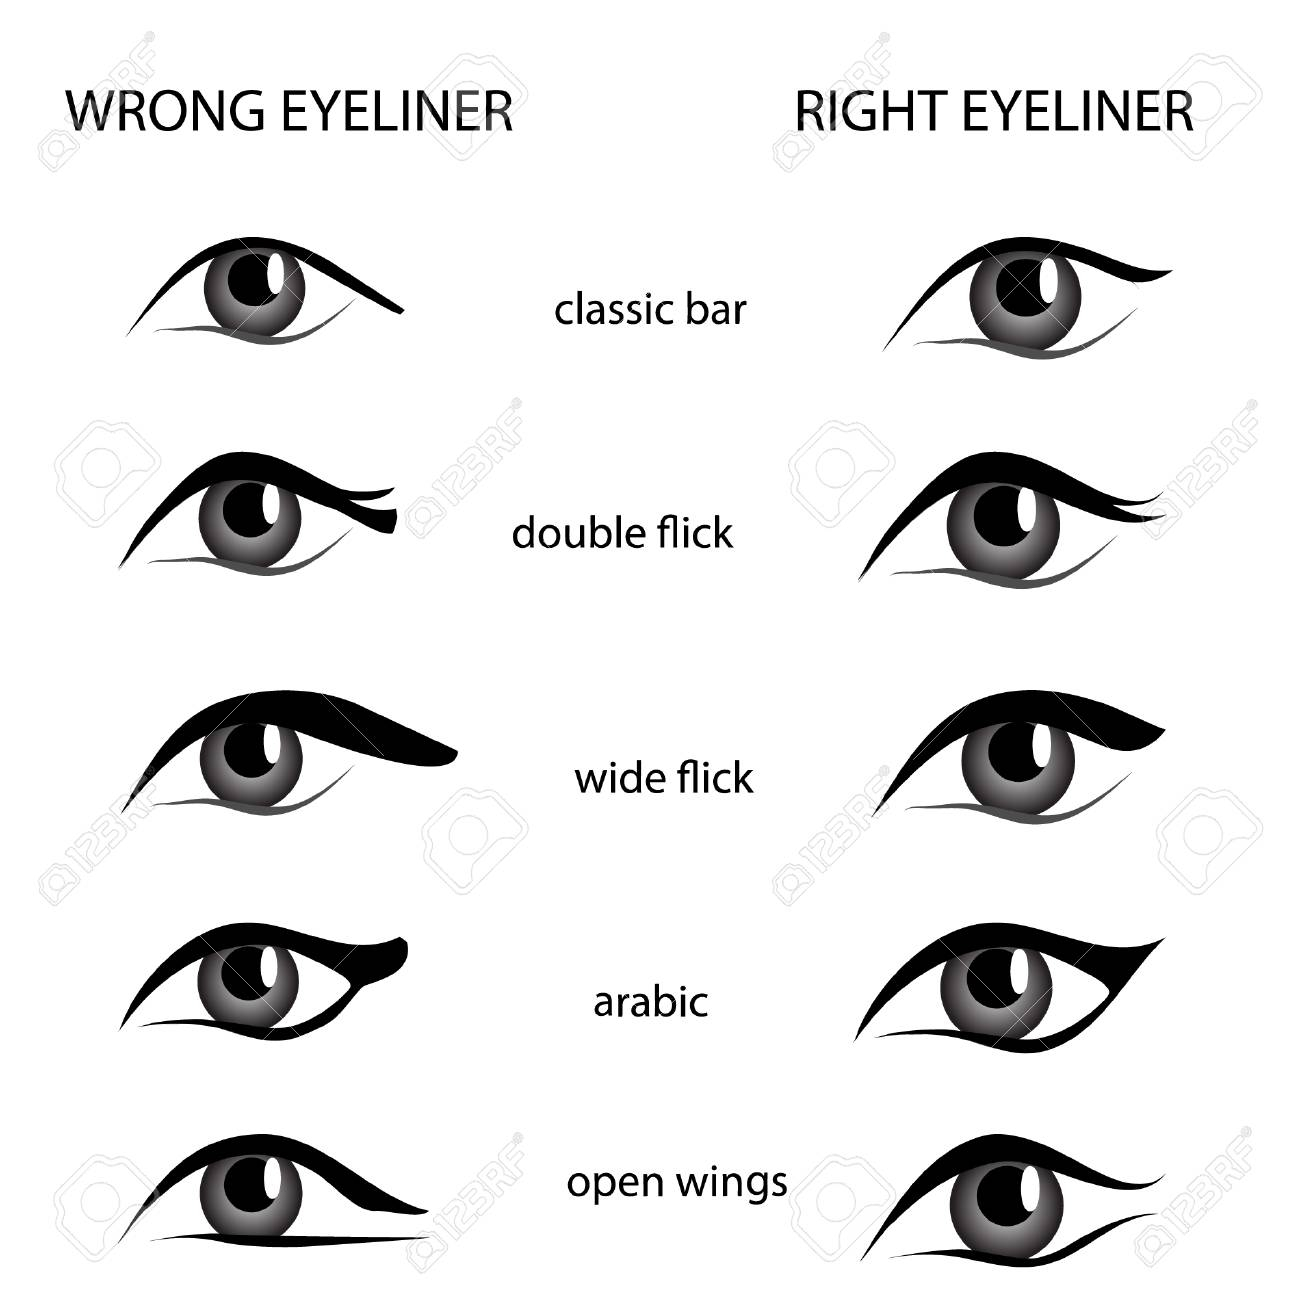 Makeup For Different Eye Shapes Various Types Of Woman Eyes With Eyeliner On White Background